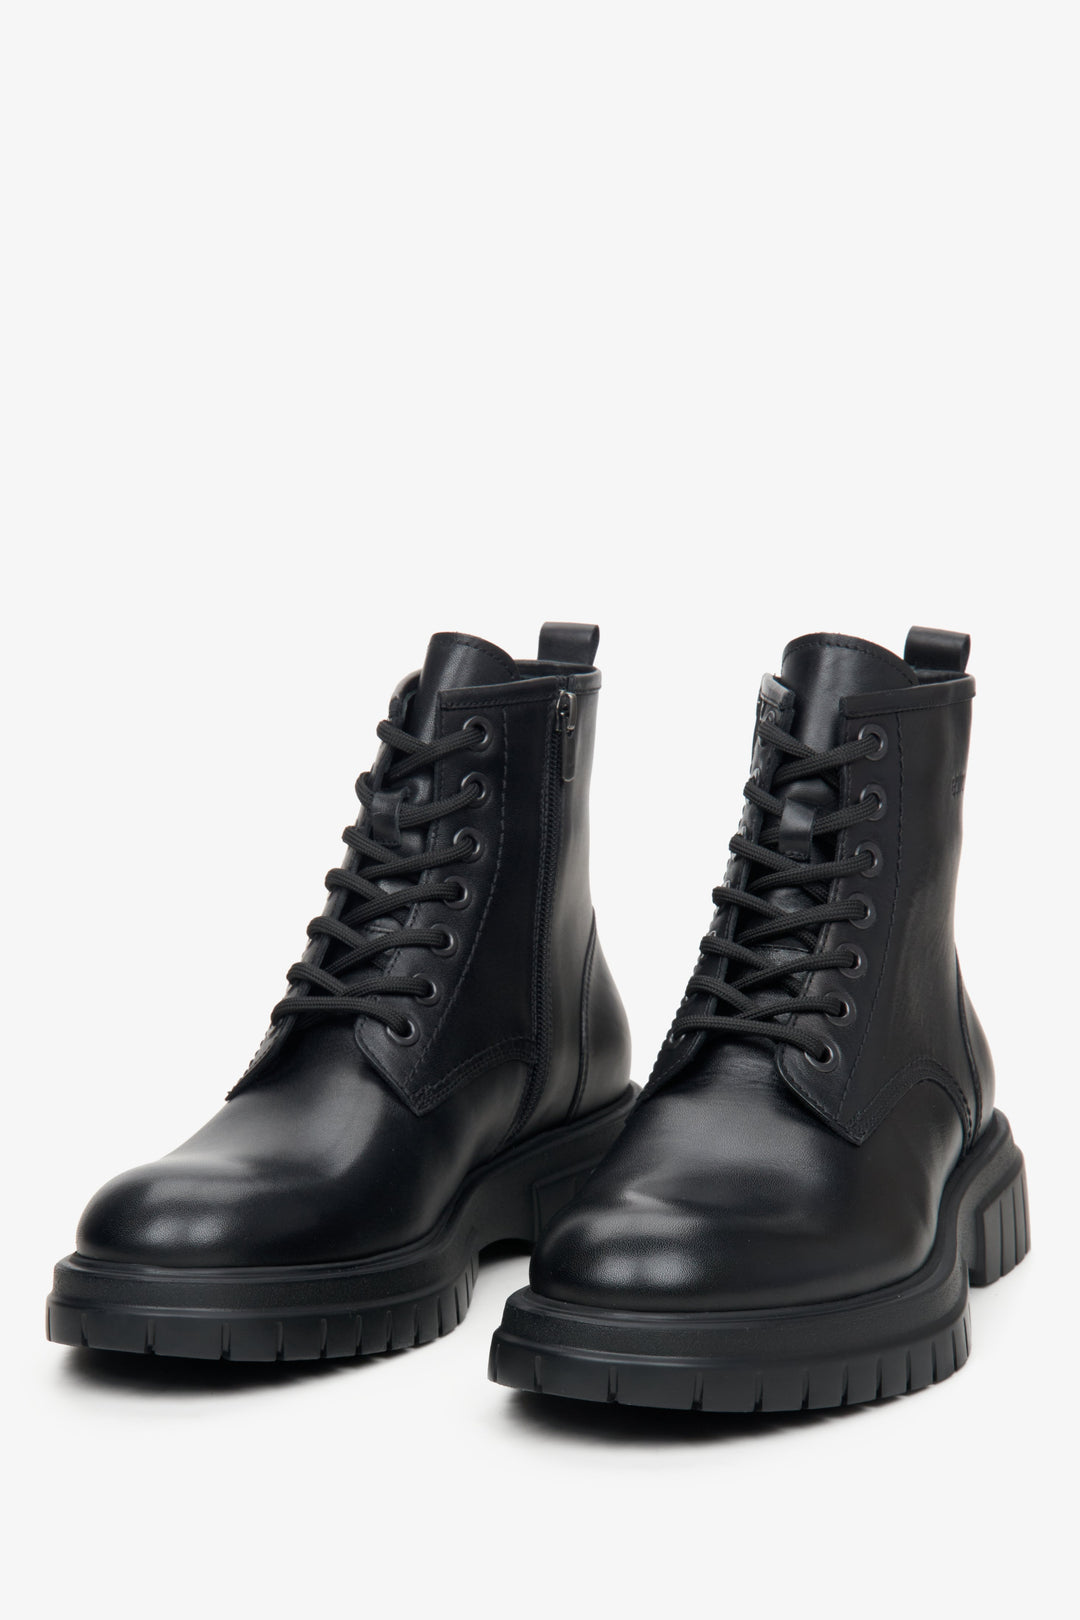 Men's black, leather Estro ankle boots - close-up on the toe and decorative lacing.